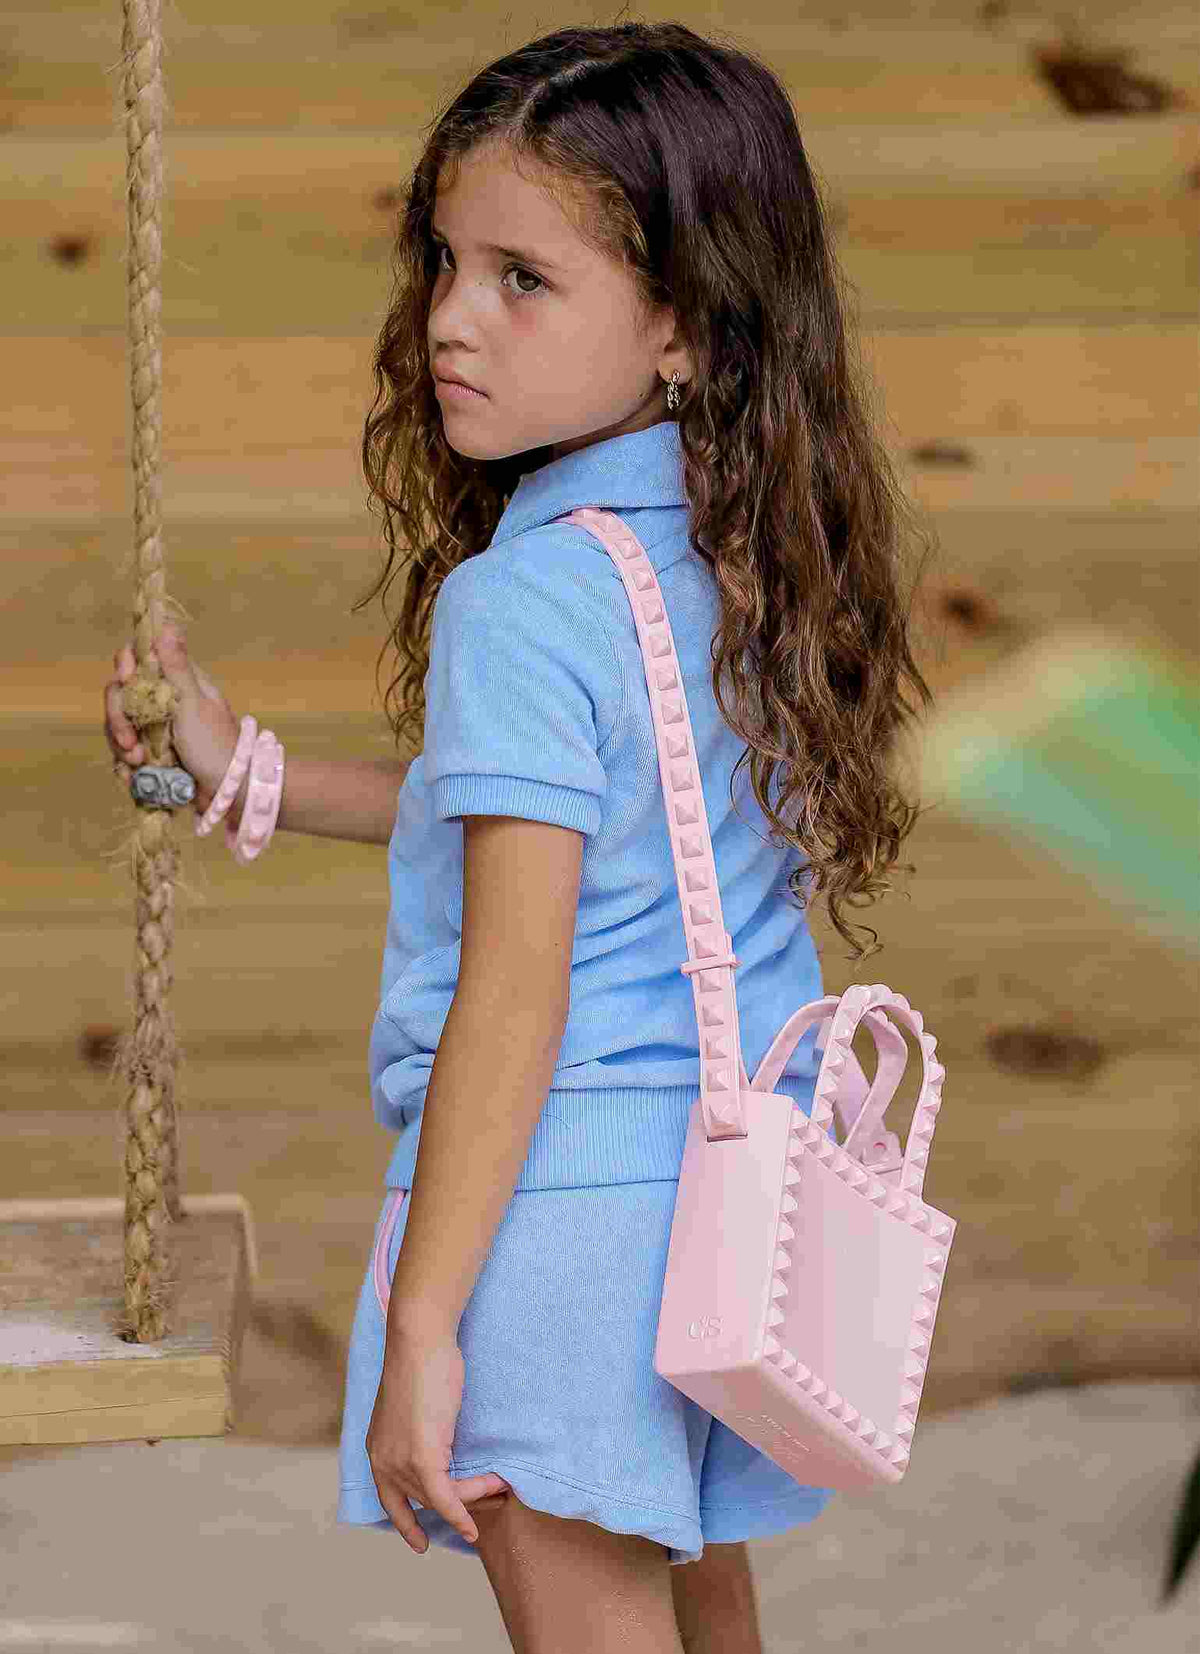 Resort style kids jelly shoulder bag from minicarmensol. Made in Italy and vegan with various attractive colors